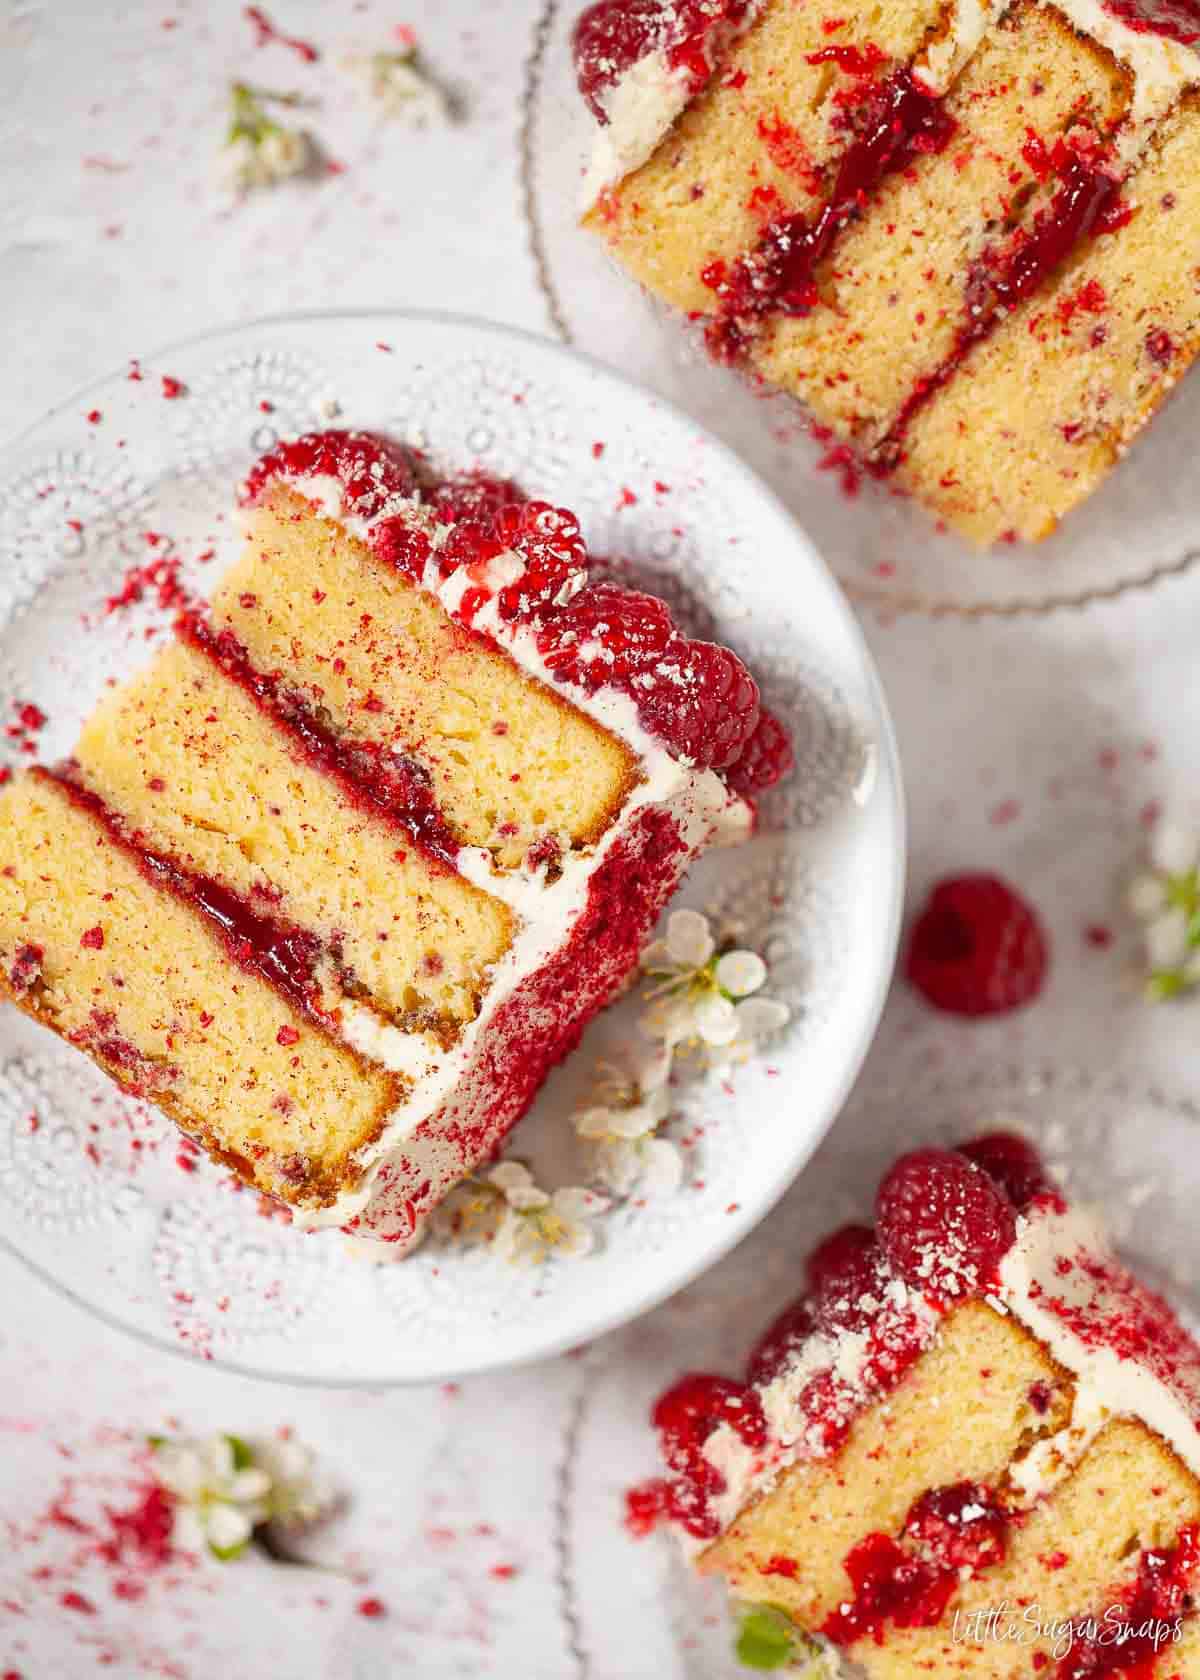 Slices of white chocolate sponge cake with raspberry puree filling and fresh raspberries on the top.